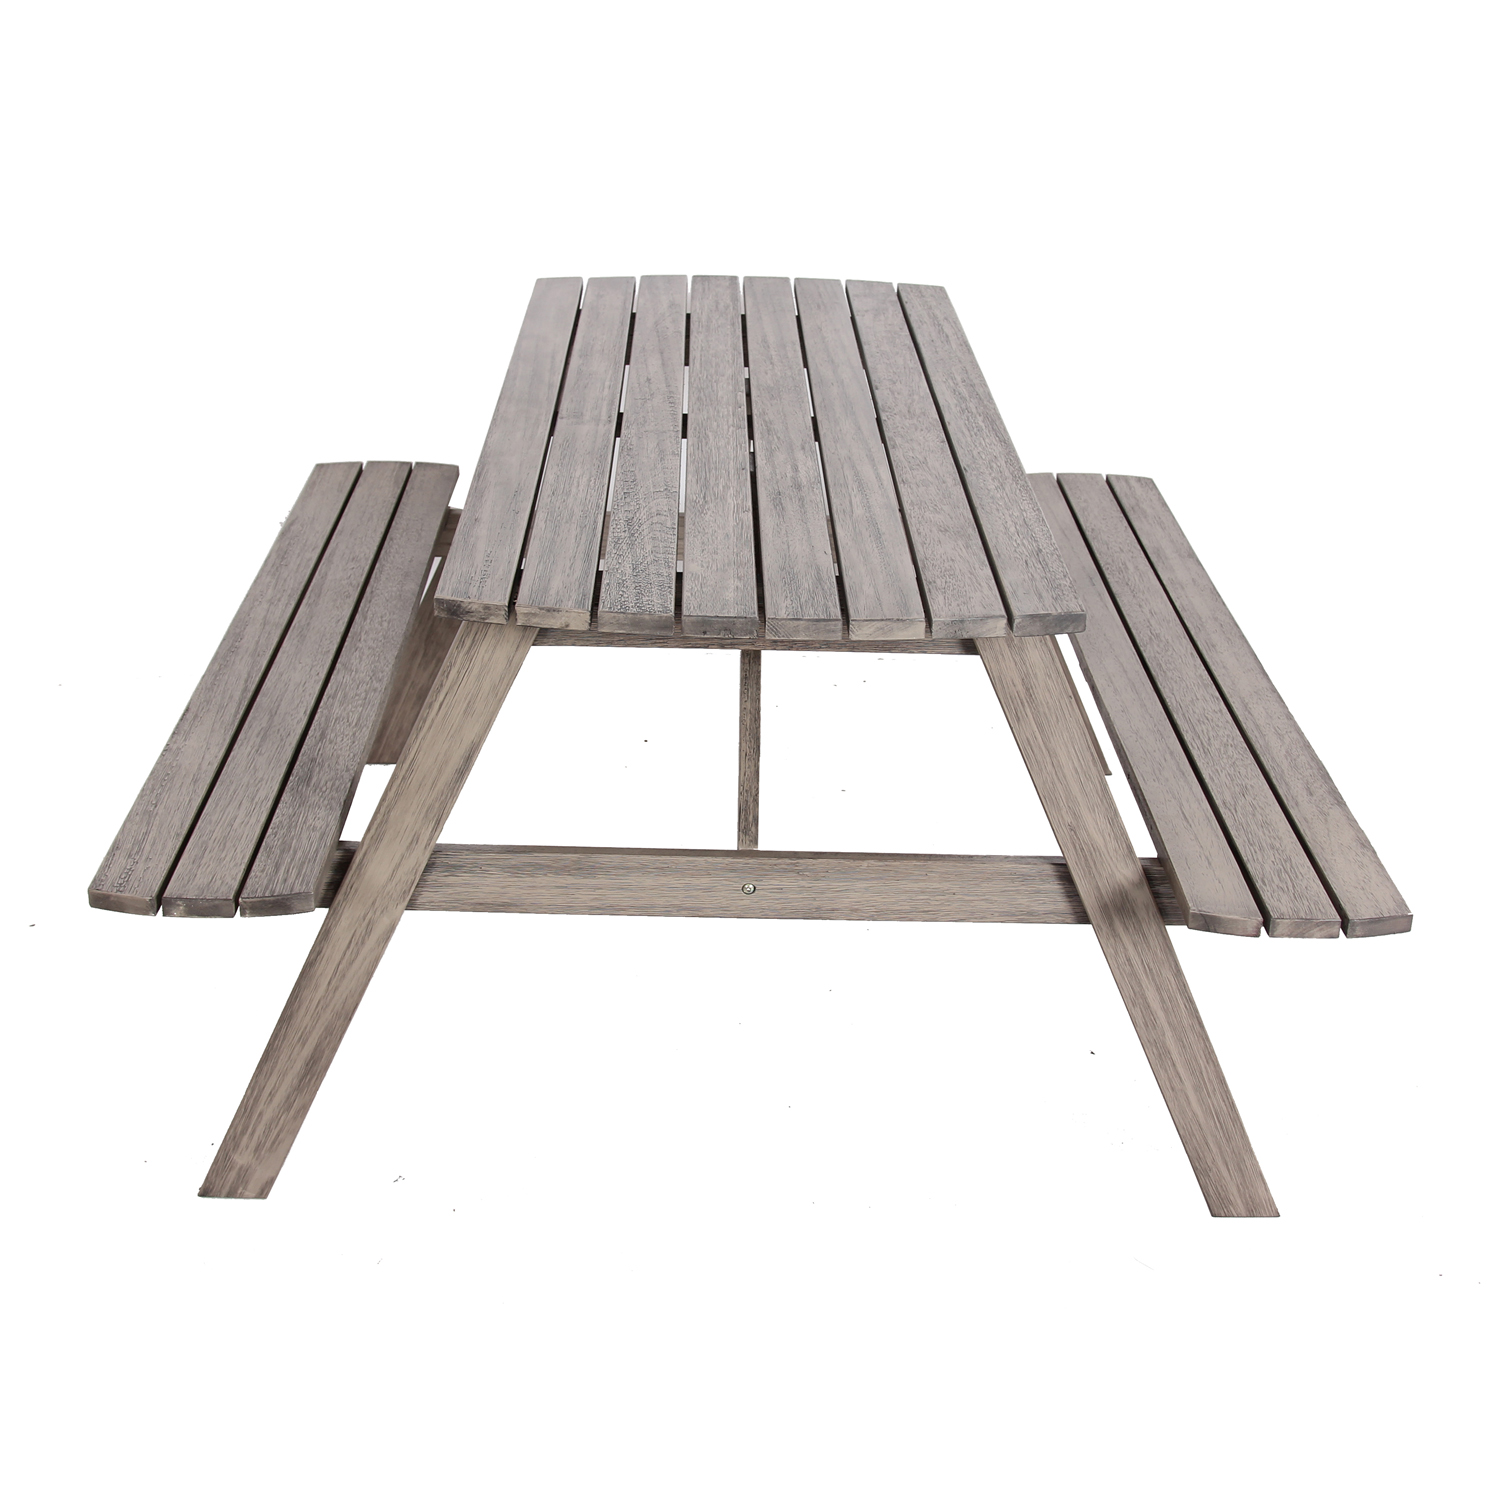 Mainstays Martis Bay Wood Outdoor Picnic Table, Gray - image 3 of 6